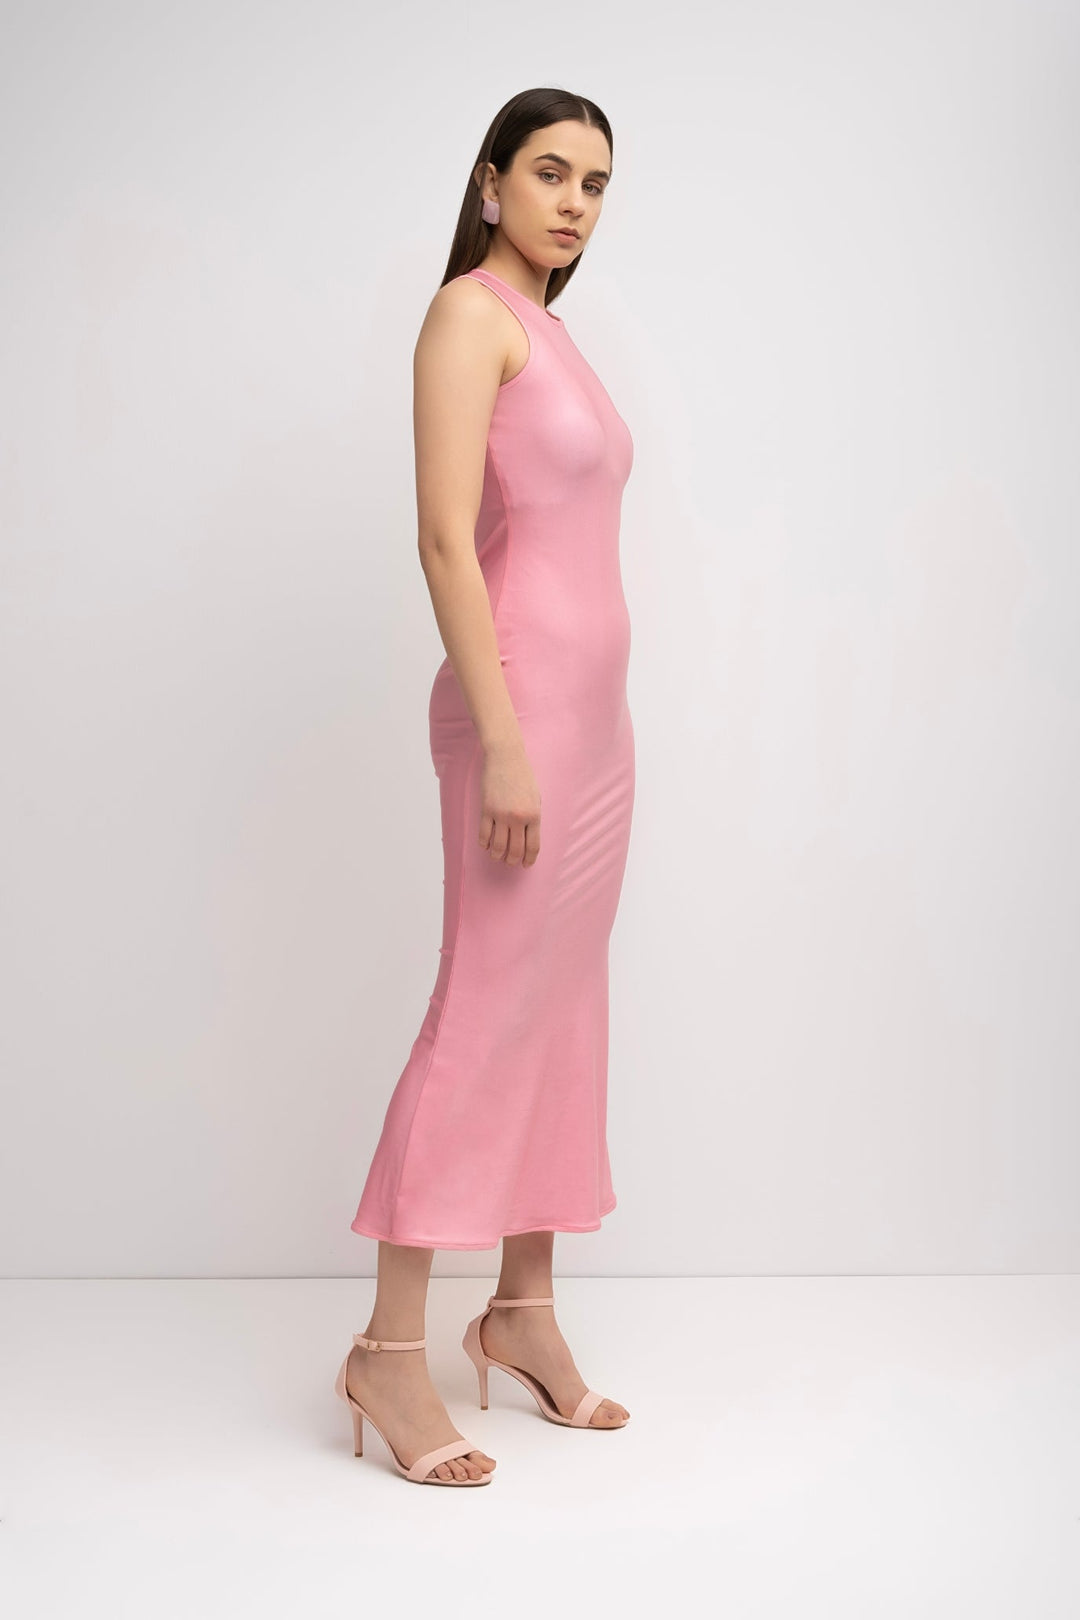 Millie Bodycon Dress - Baby Pink